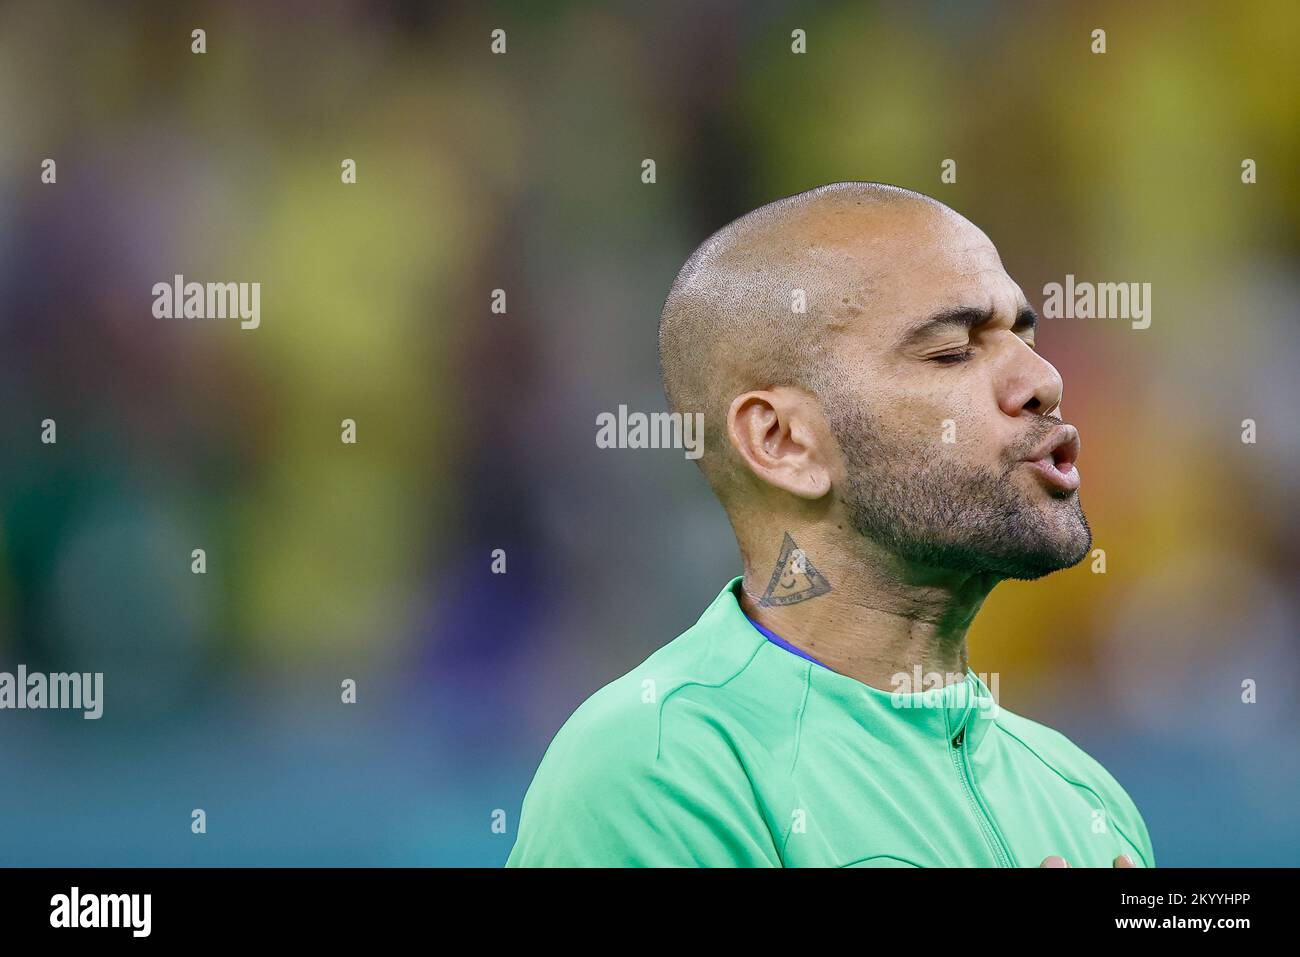 Lusail, Catar. 02nd Dec, 2022. DANI ALVES of Brazil during a match between Cameroon and Brazil, valid for the group stage of the World Cup, held at the National Stadium of Lusail in Lusail, Qatar. Credit: Rodolfo Buhrer/La Imagem/FotoArena/Alamy Live News Stock Photo